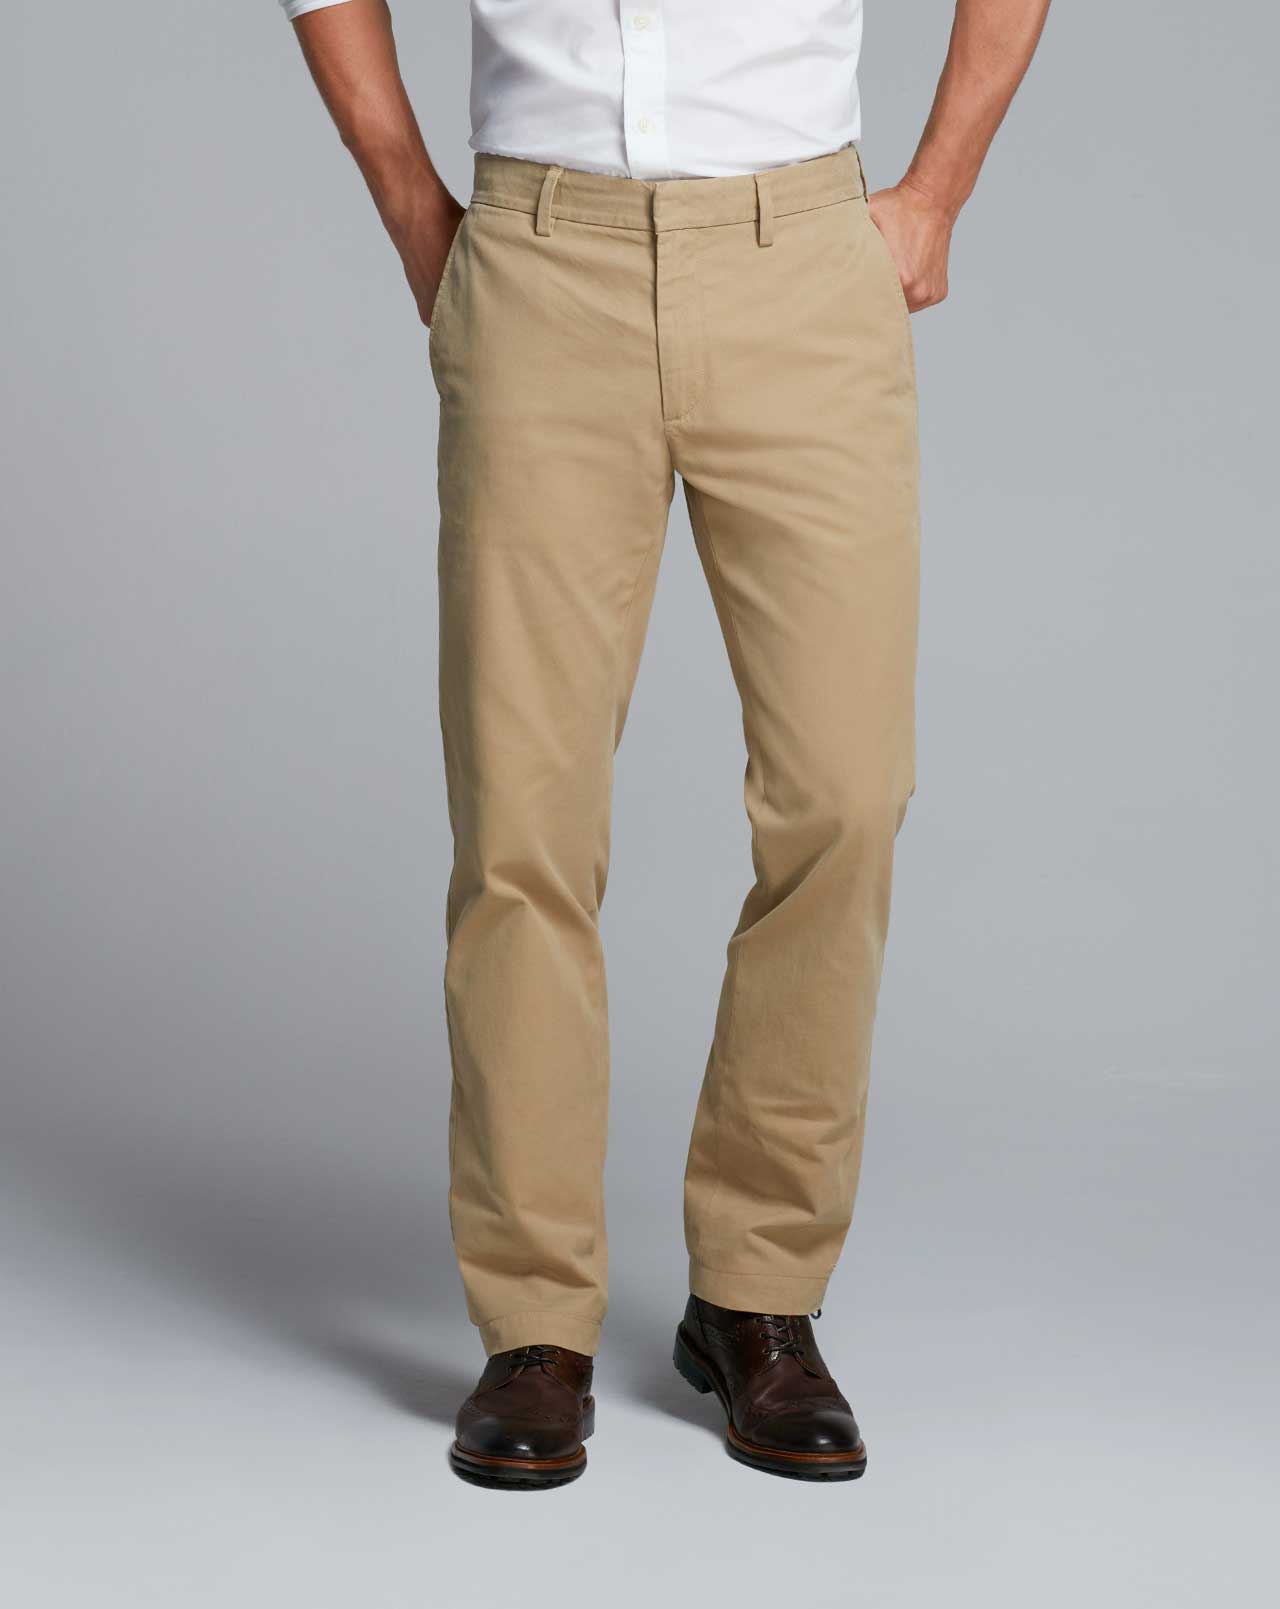 Fit Guide Men's Chinos - Emerson